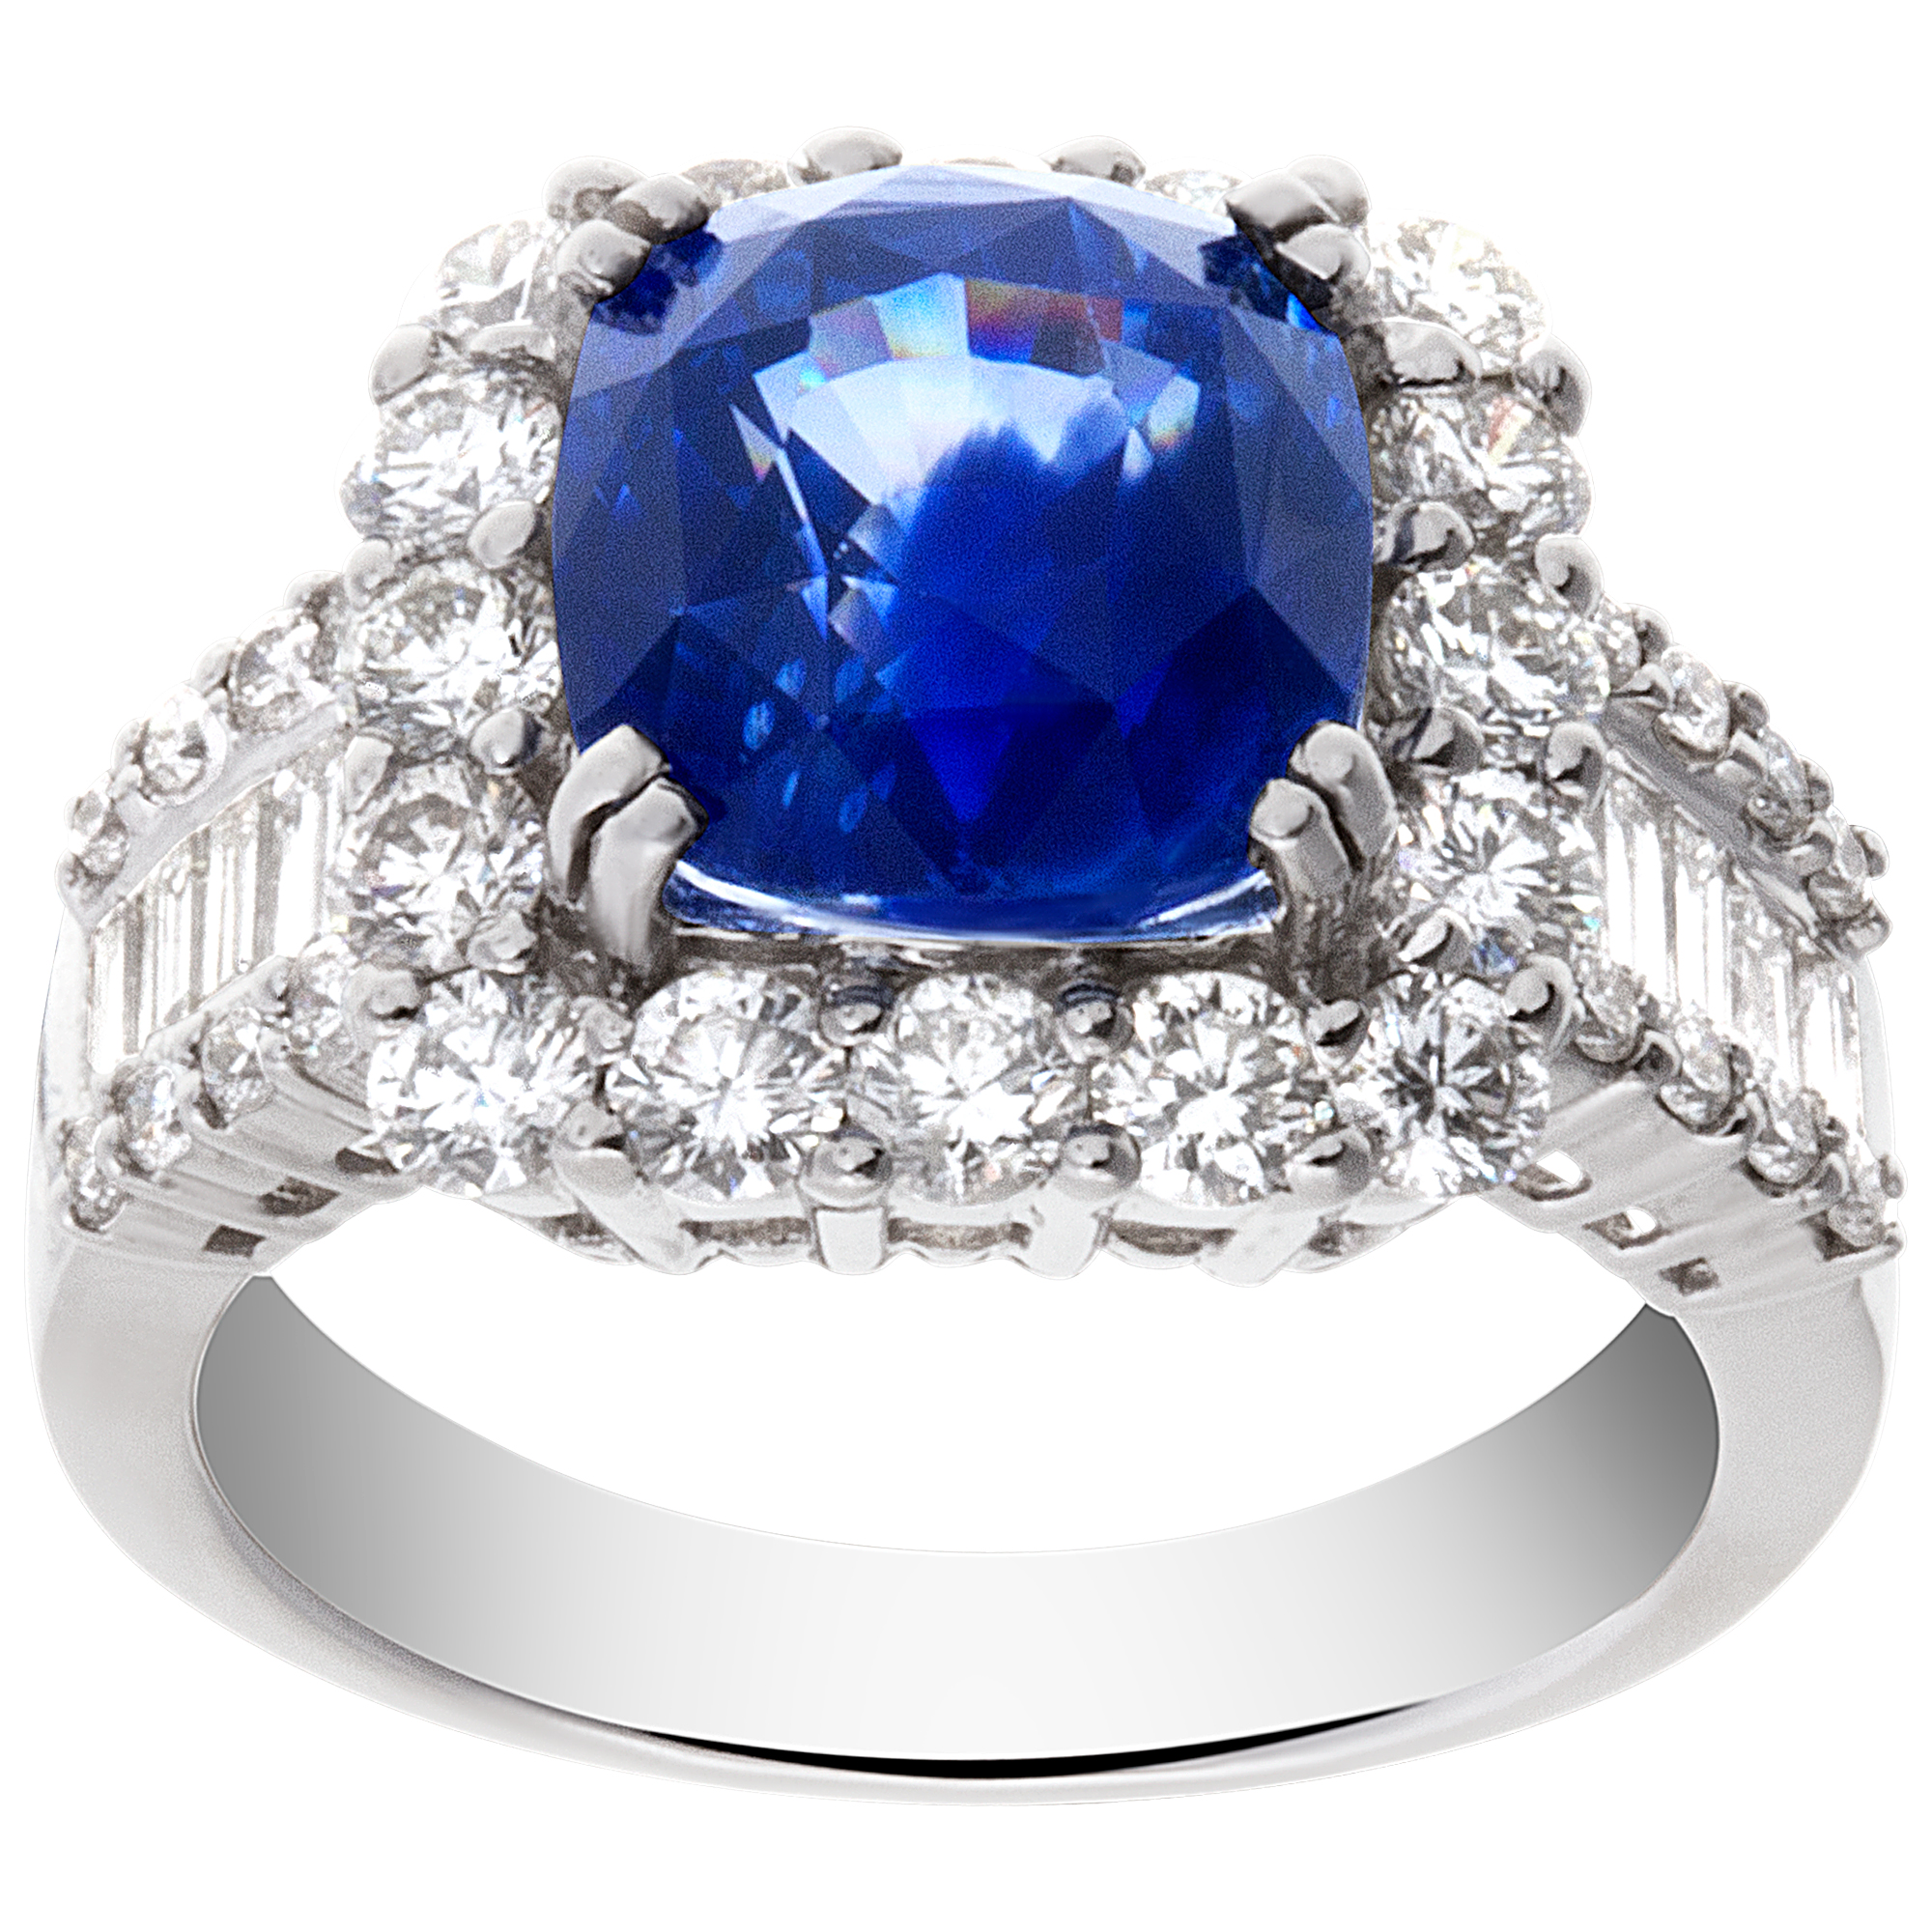 Sparkling 5.73 carat blue sapphire ring with diamond accents in 18k white gold